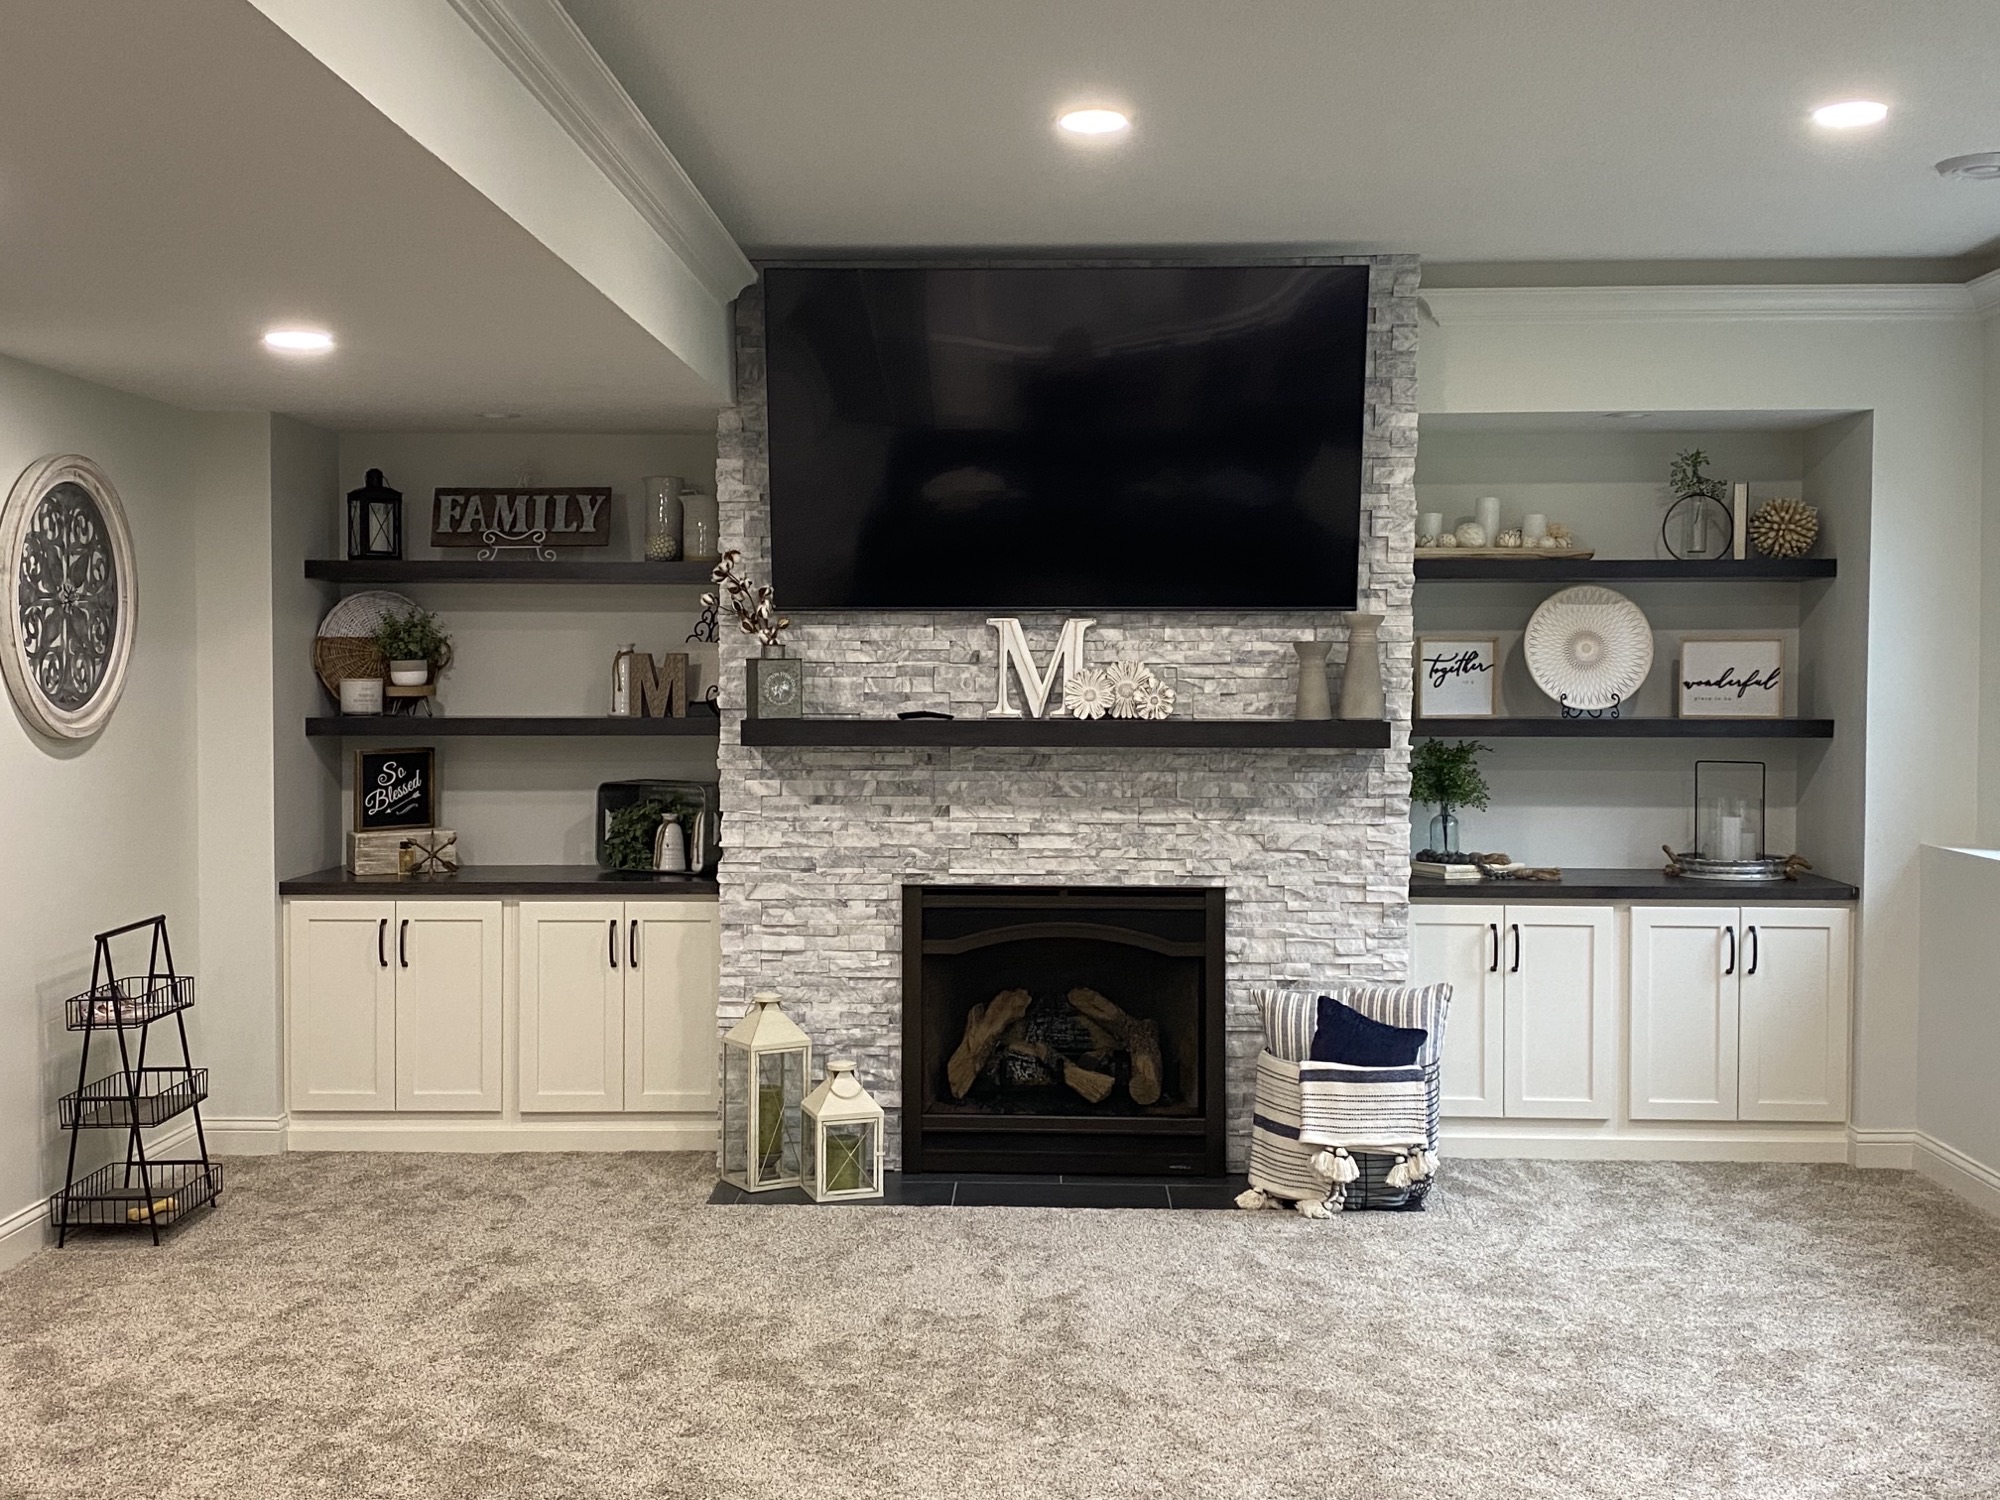 Family Room With Stone Fireplace. Modern white cabinets with black hardware and dark free standing shelves.